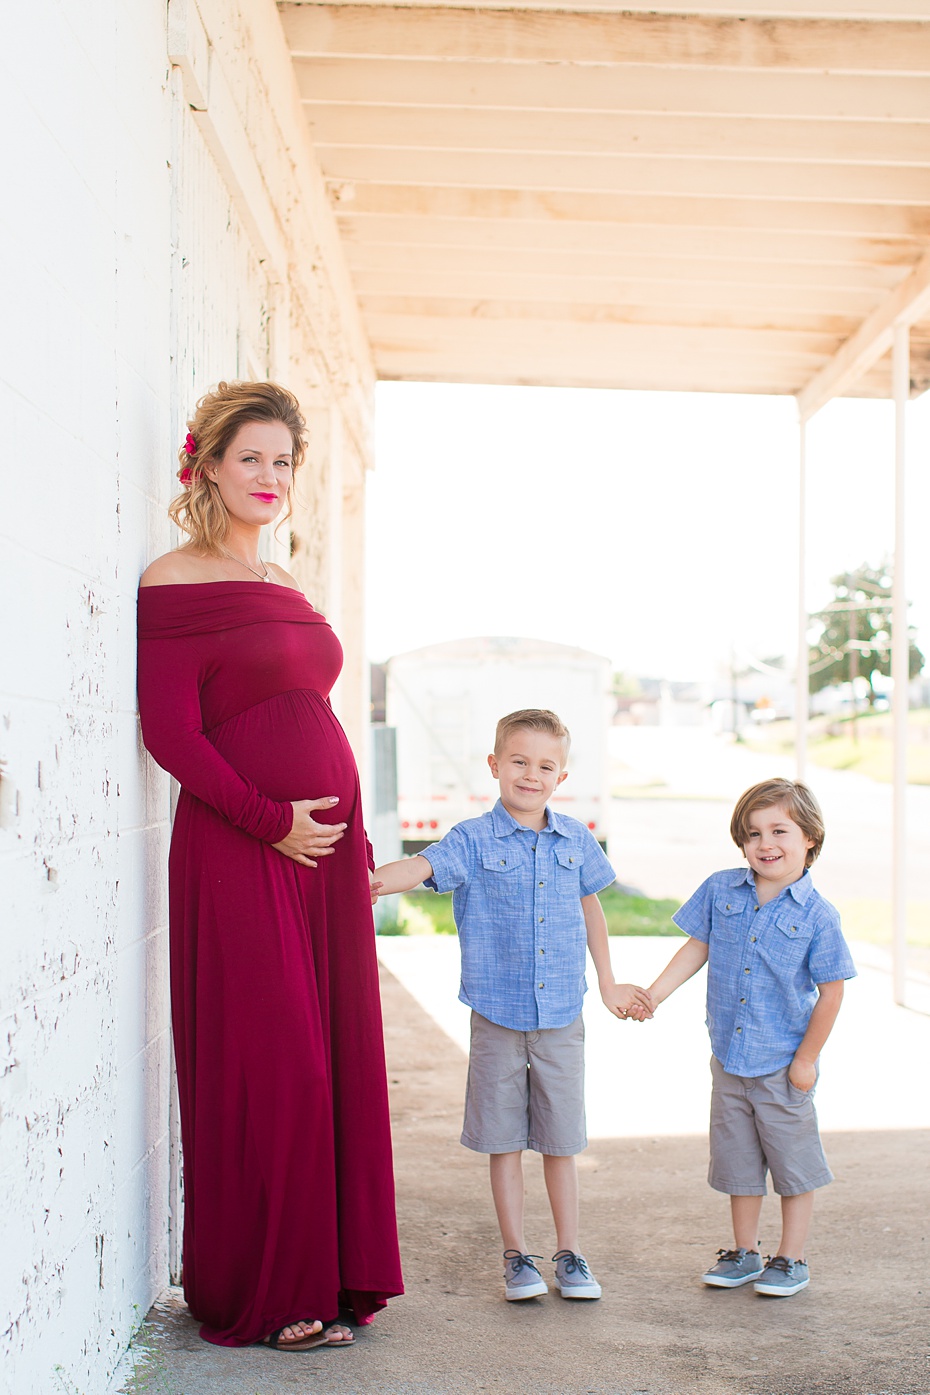 truly_you_photography_enid__photographer_family_maternity-4_web.jpg